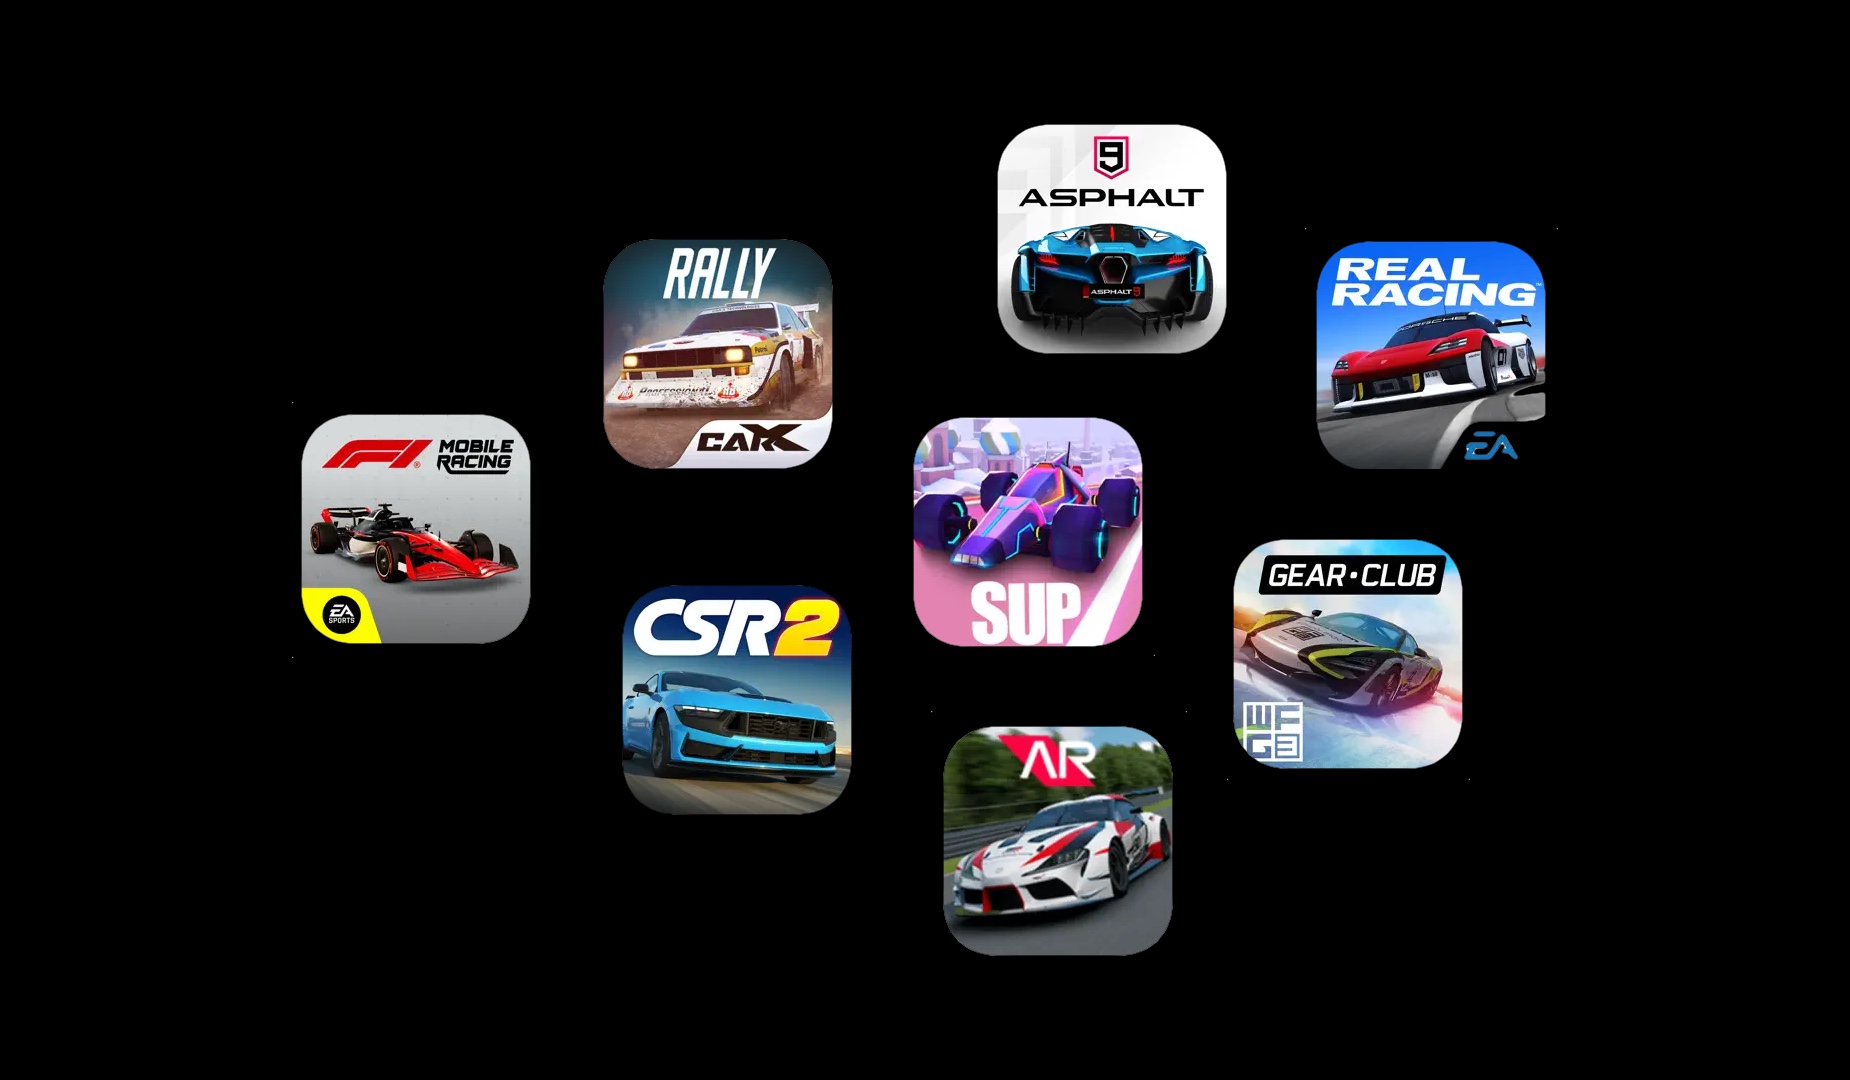 Best racing games on iOS mobile devices: The top 12